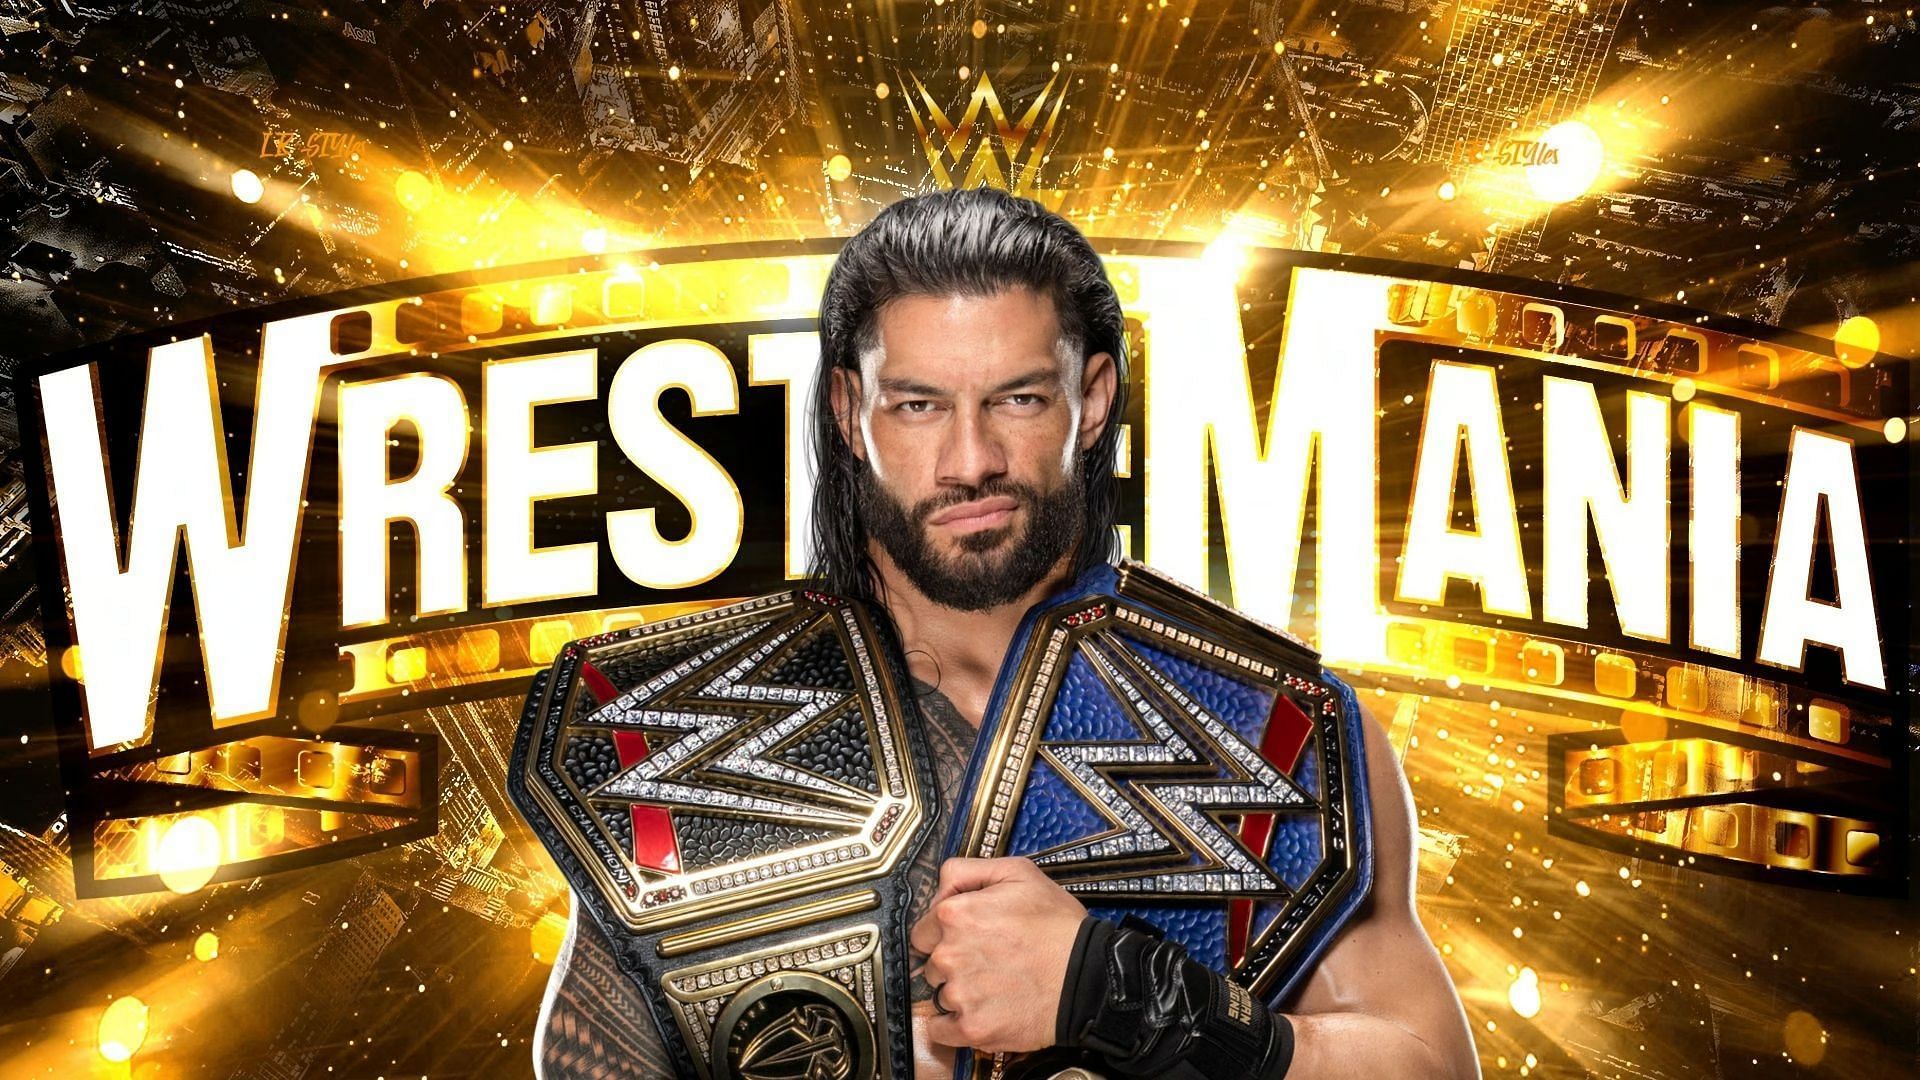 RAW Star claims he will headline WrestleMania against Roman Reigns for